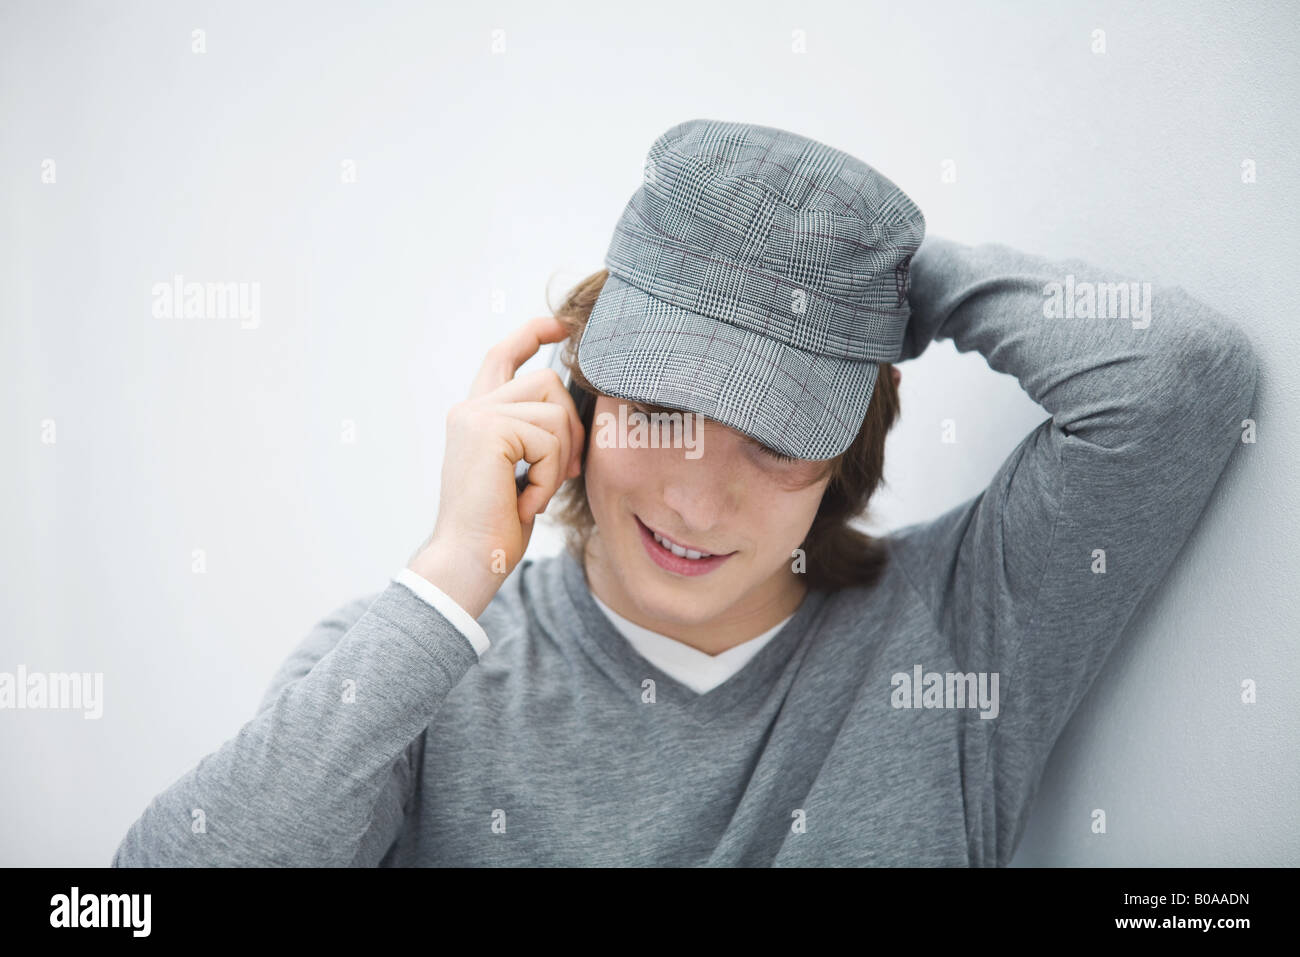 Young man in cap using cell phone, looking down, one hand behind head Stock Photo